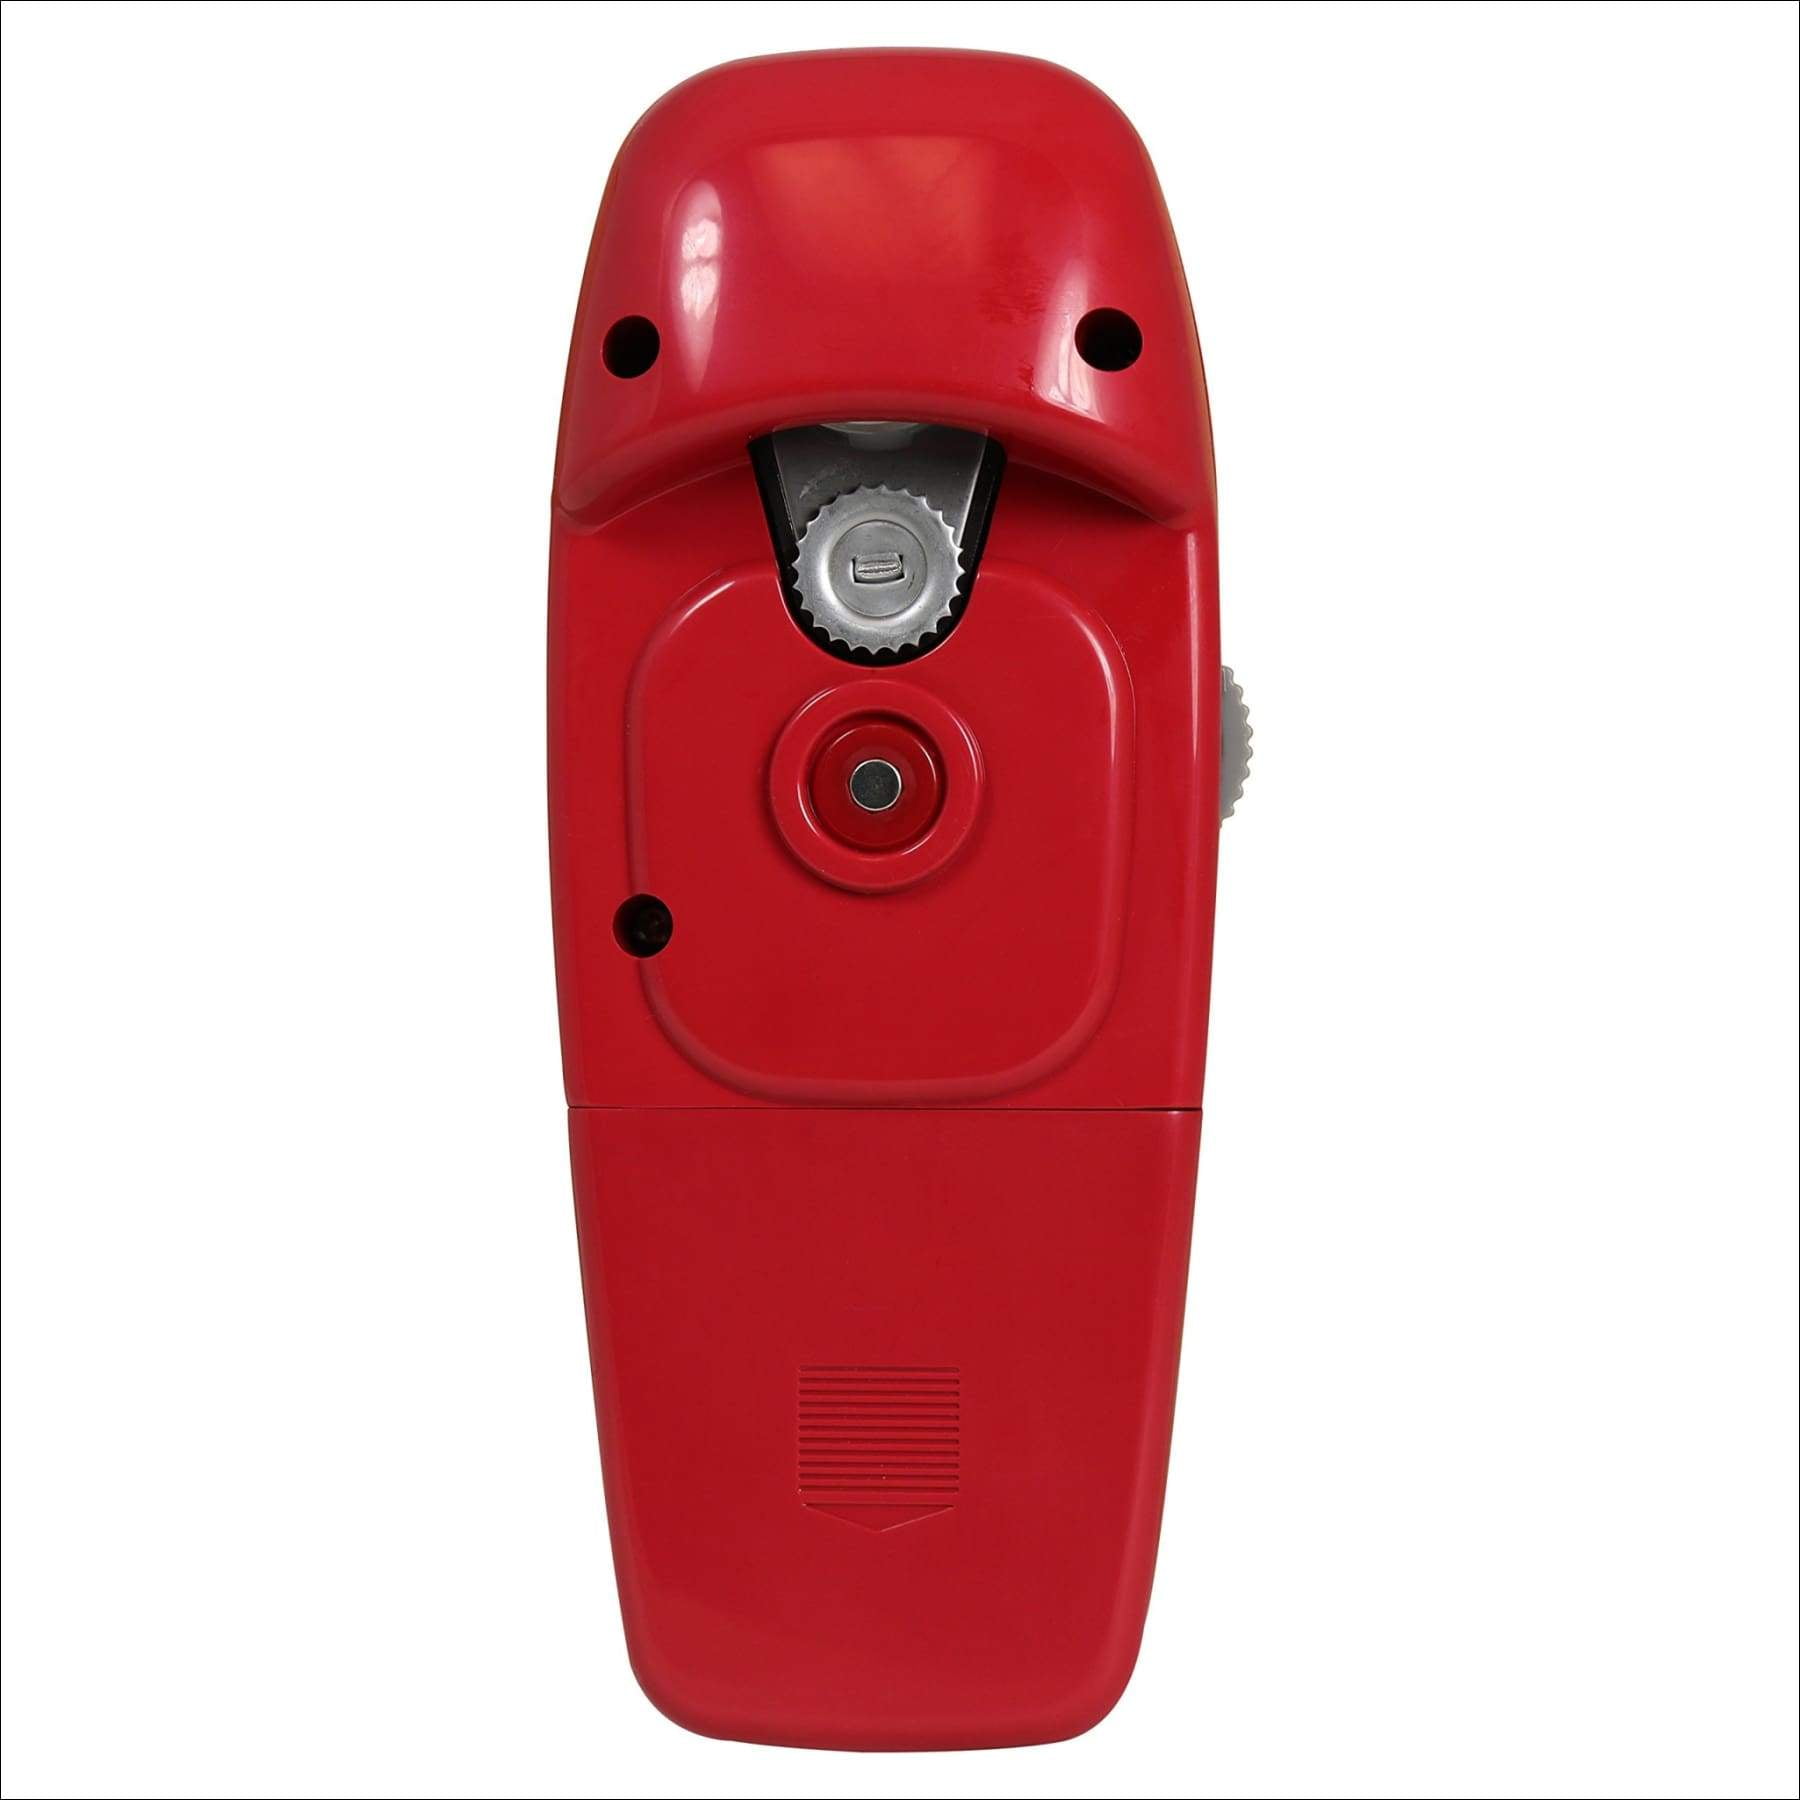 New Handy Automatic Can Opener in Black or Red One Touch Free Shipping 